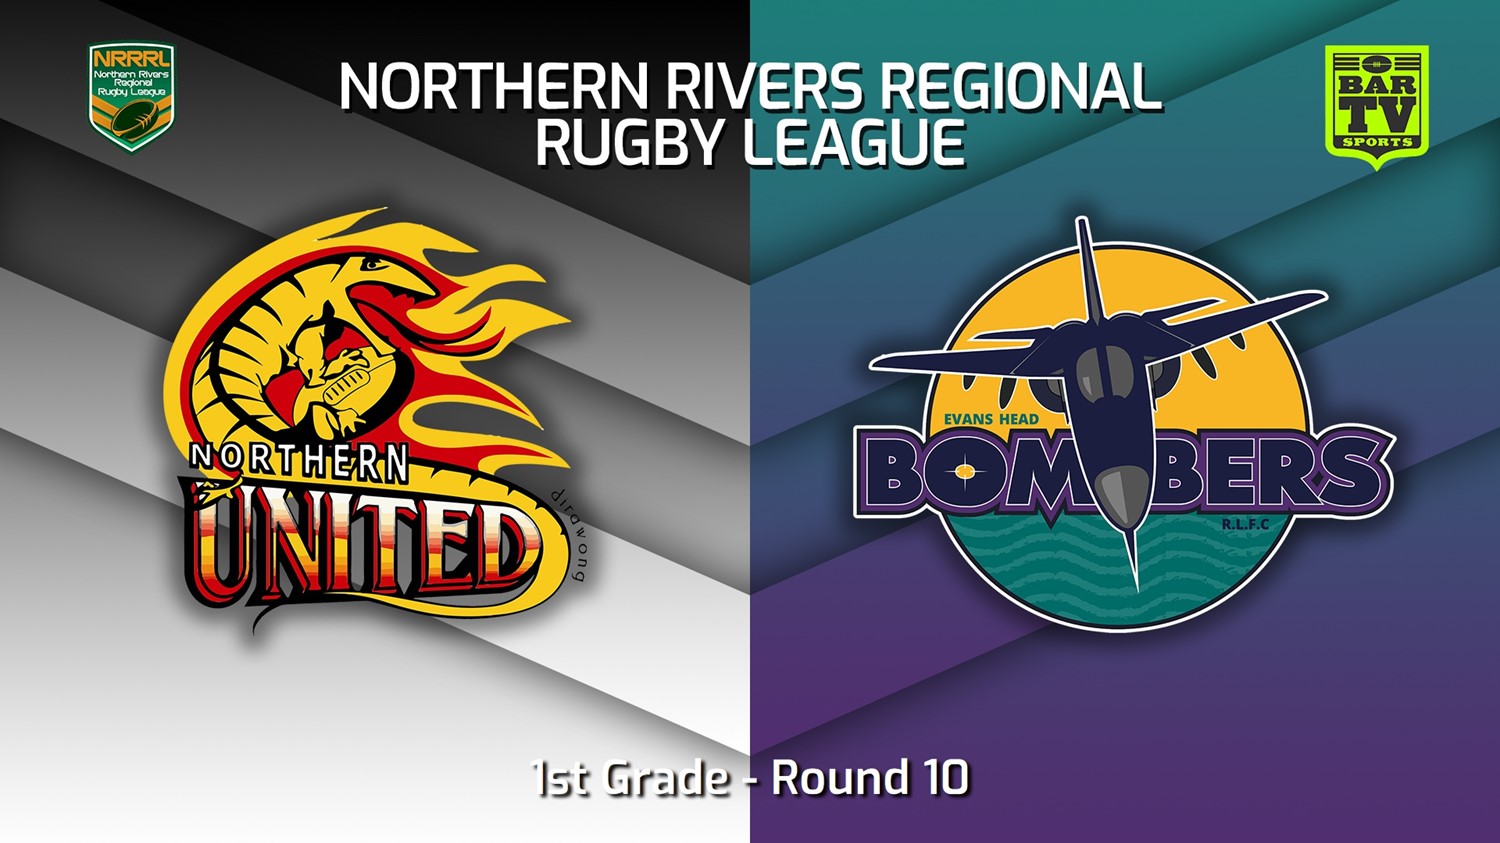 220703-Northern Rivers Round 10 - 1st Grade - Northern United v Evans Head Bombers Slate Image